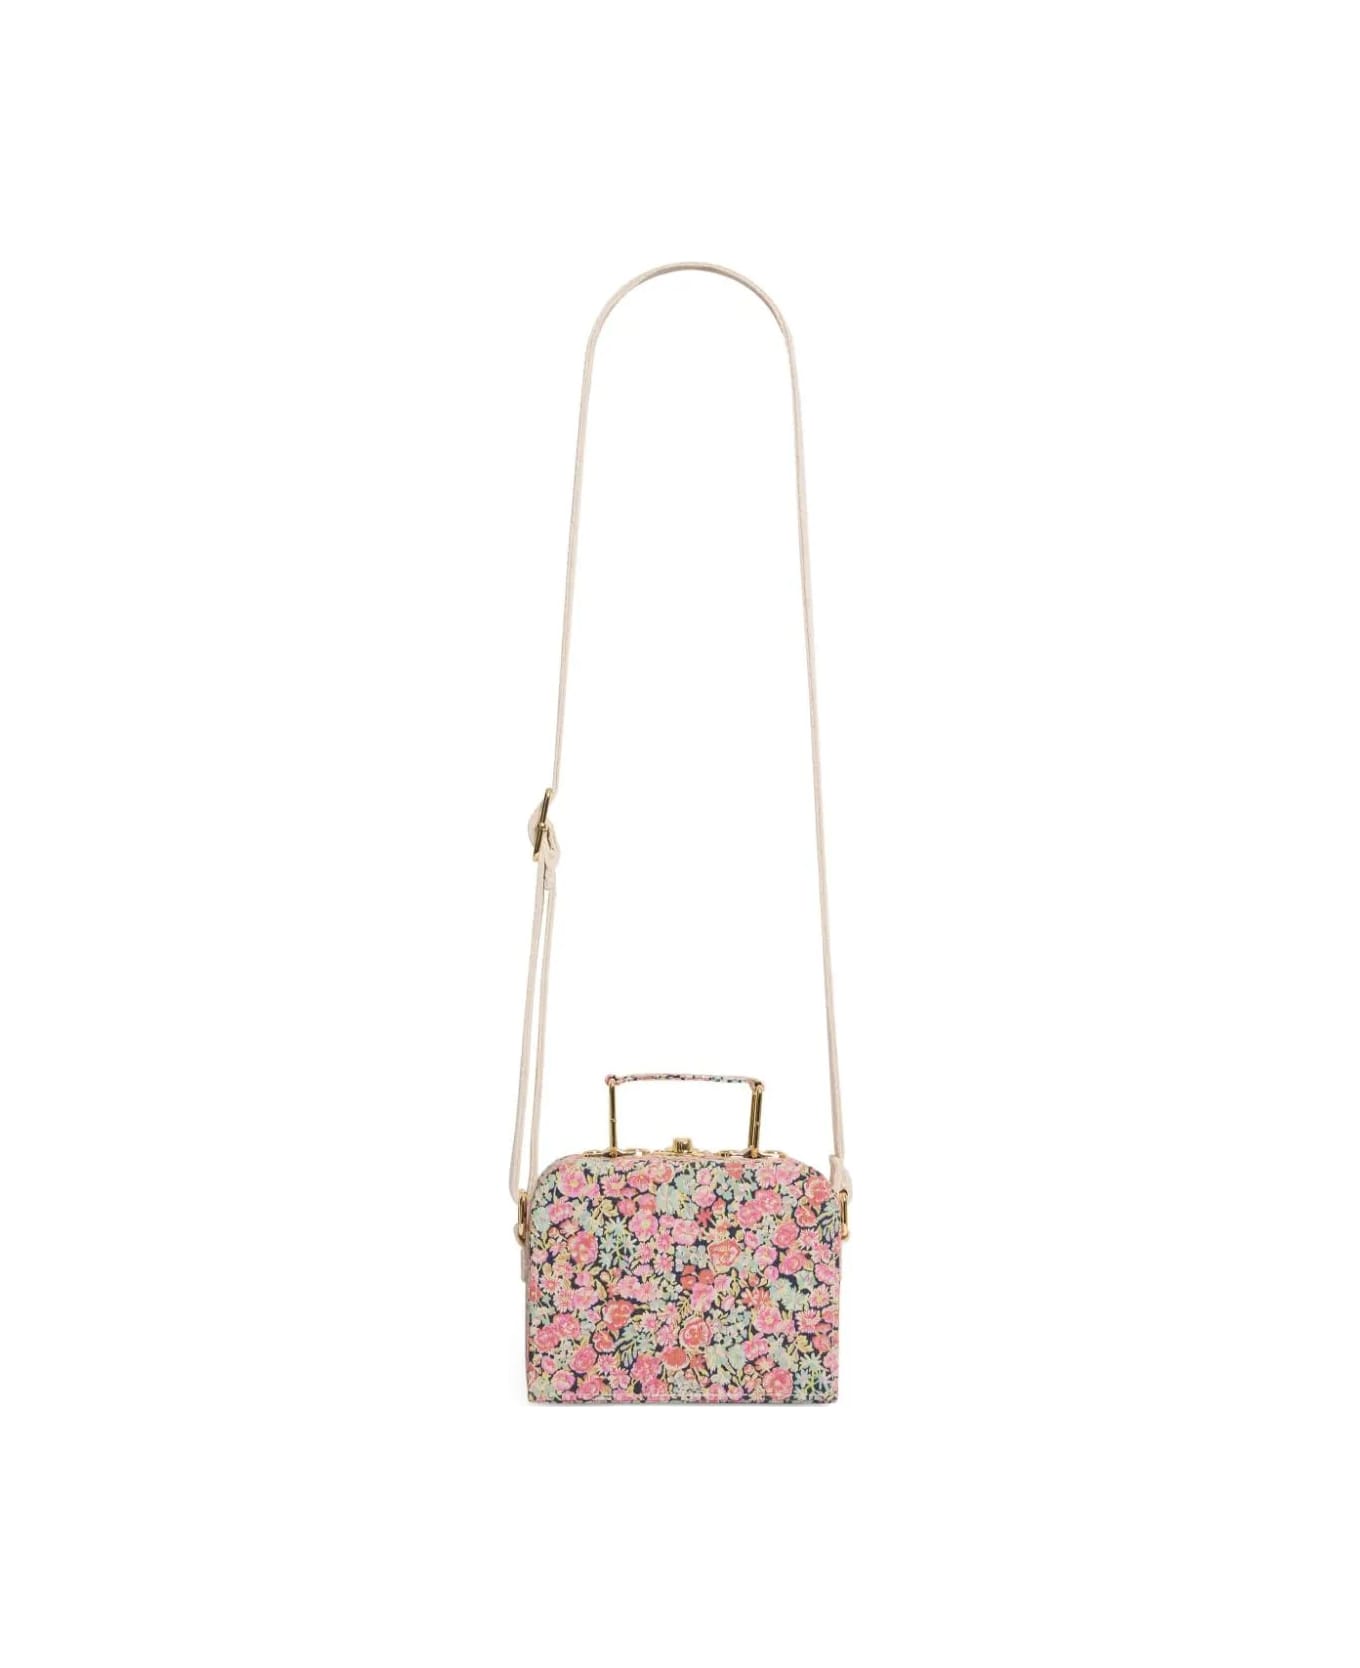 Bonpoint Coral Aimane Suitcase Bag - MULTICOLOR アクセサリー＆ギフト